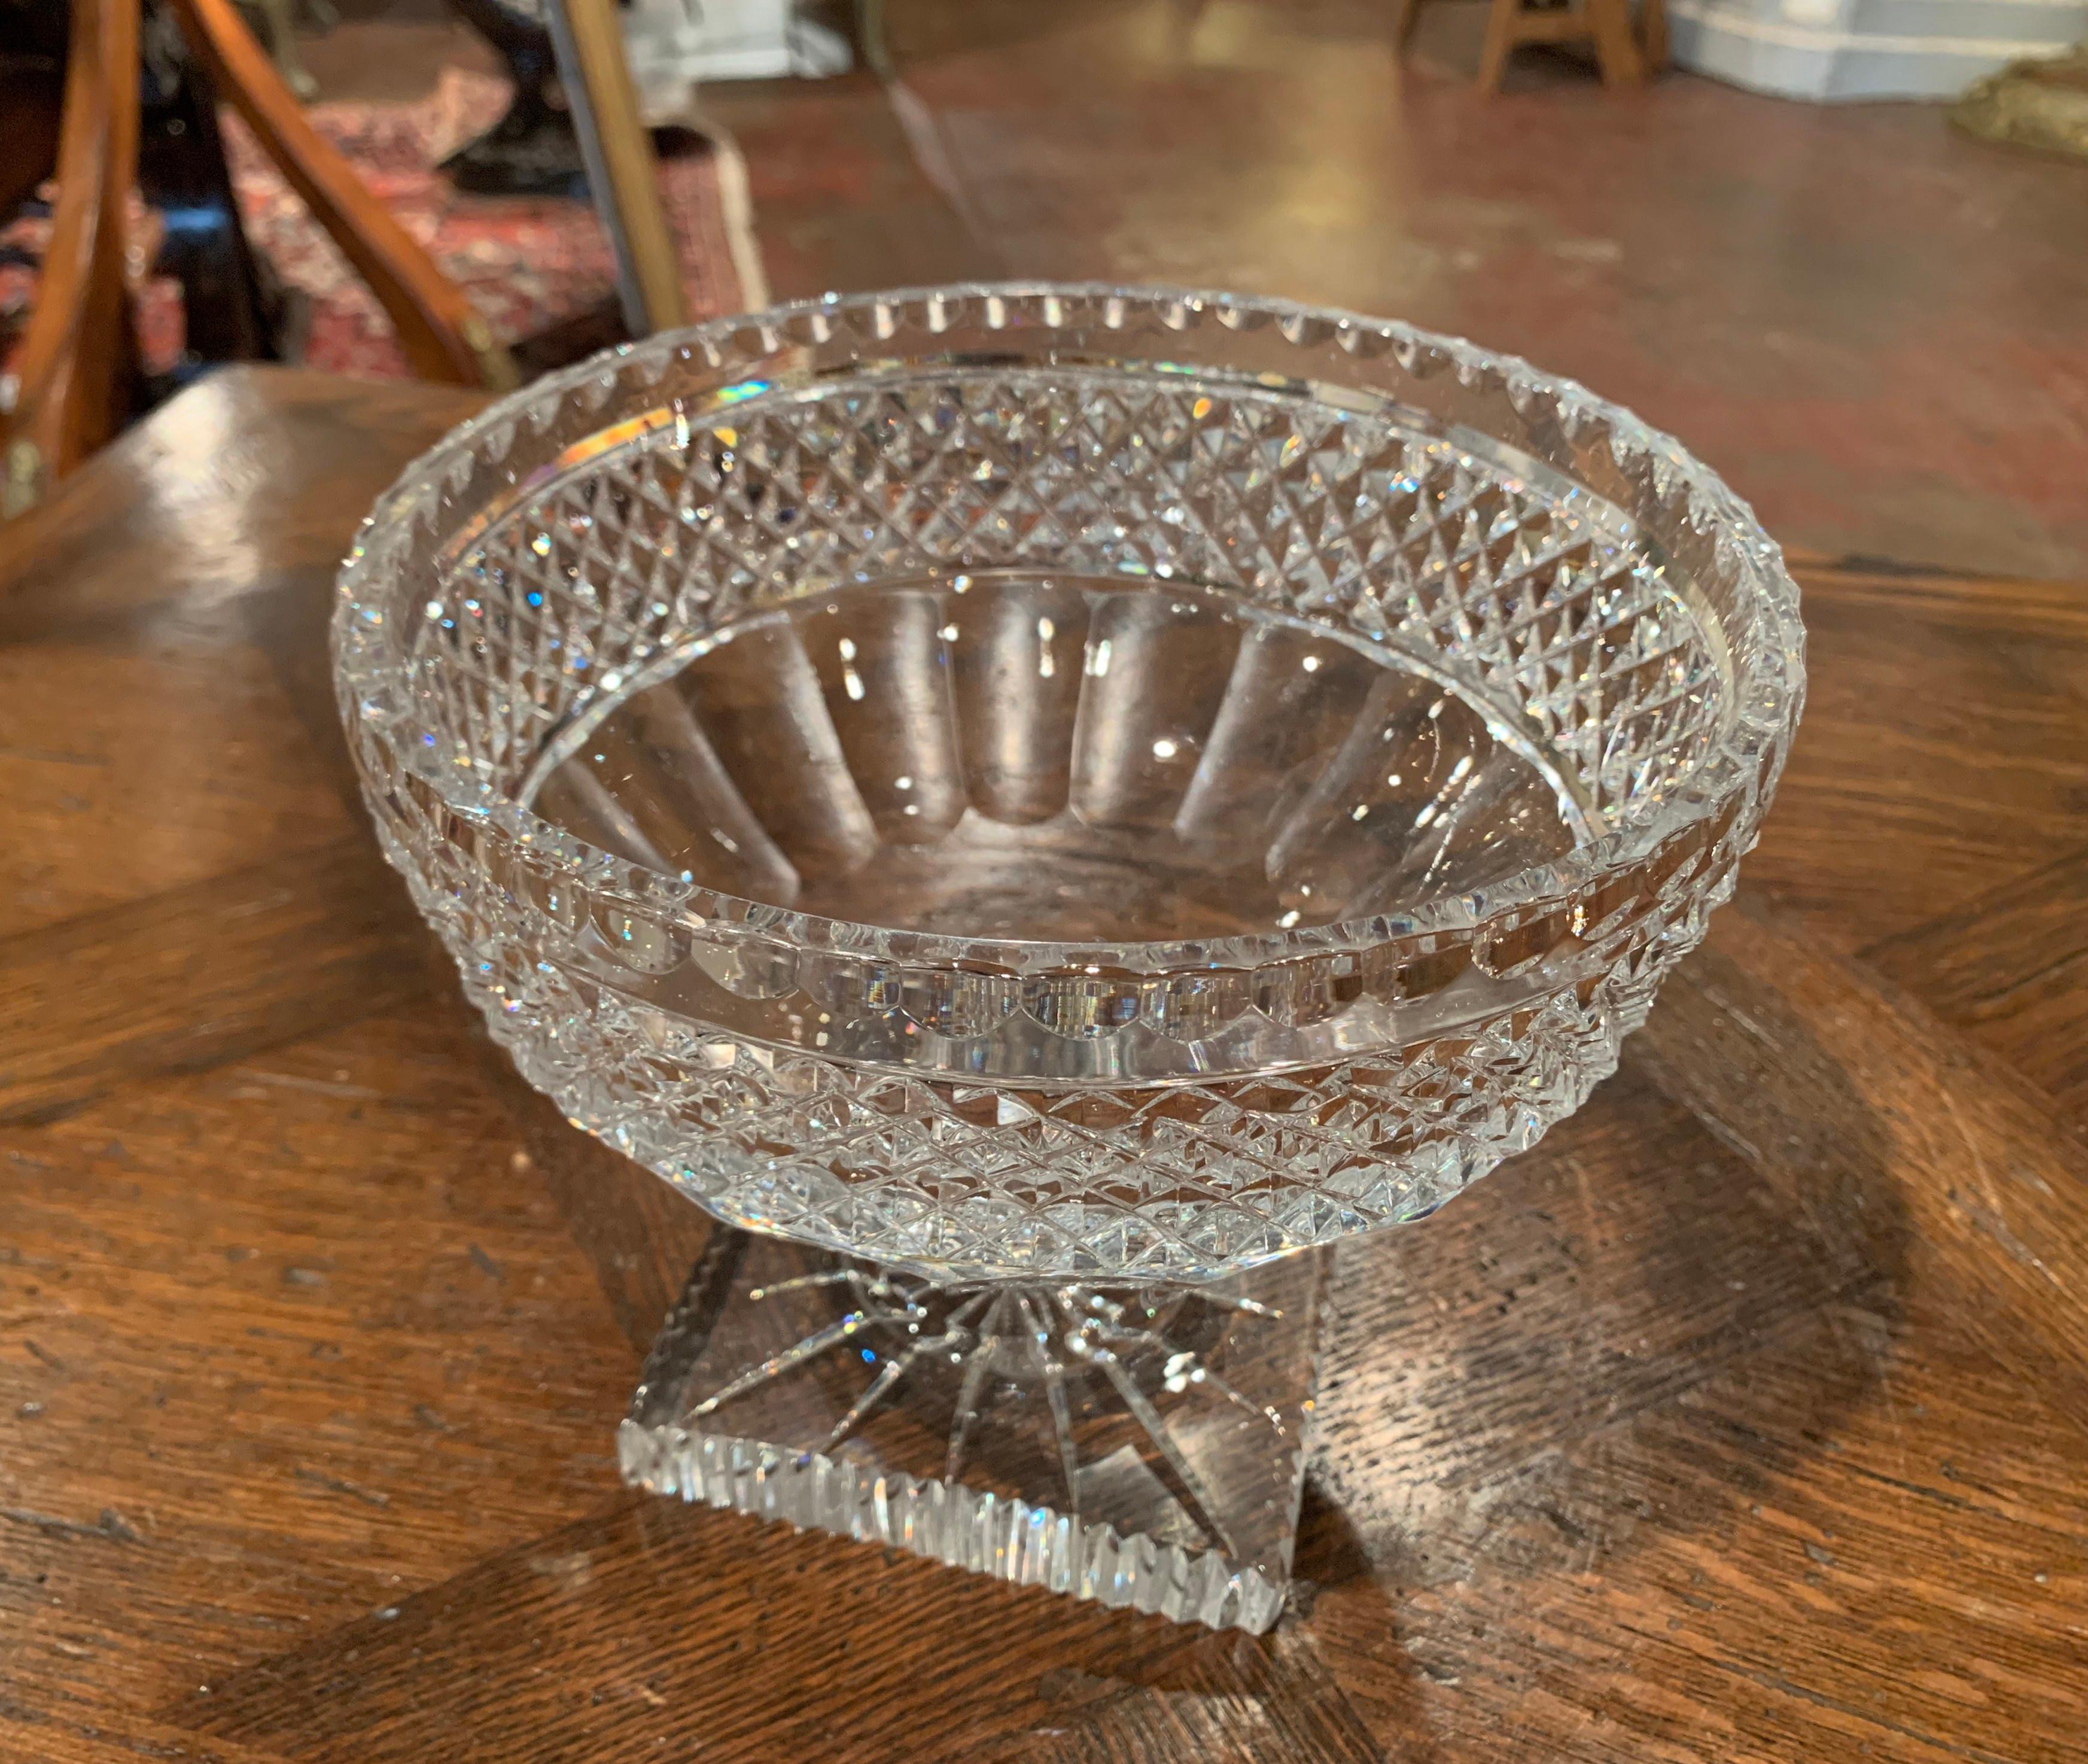 20th Century Midcentury French Cut Glass Crystal Decorative Compote Centerpiece Bowl